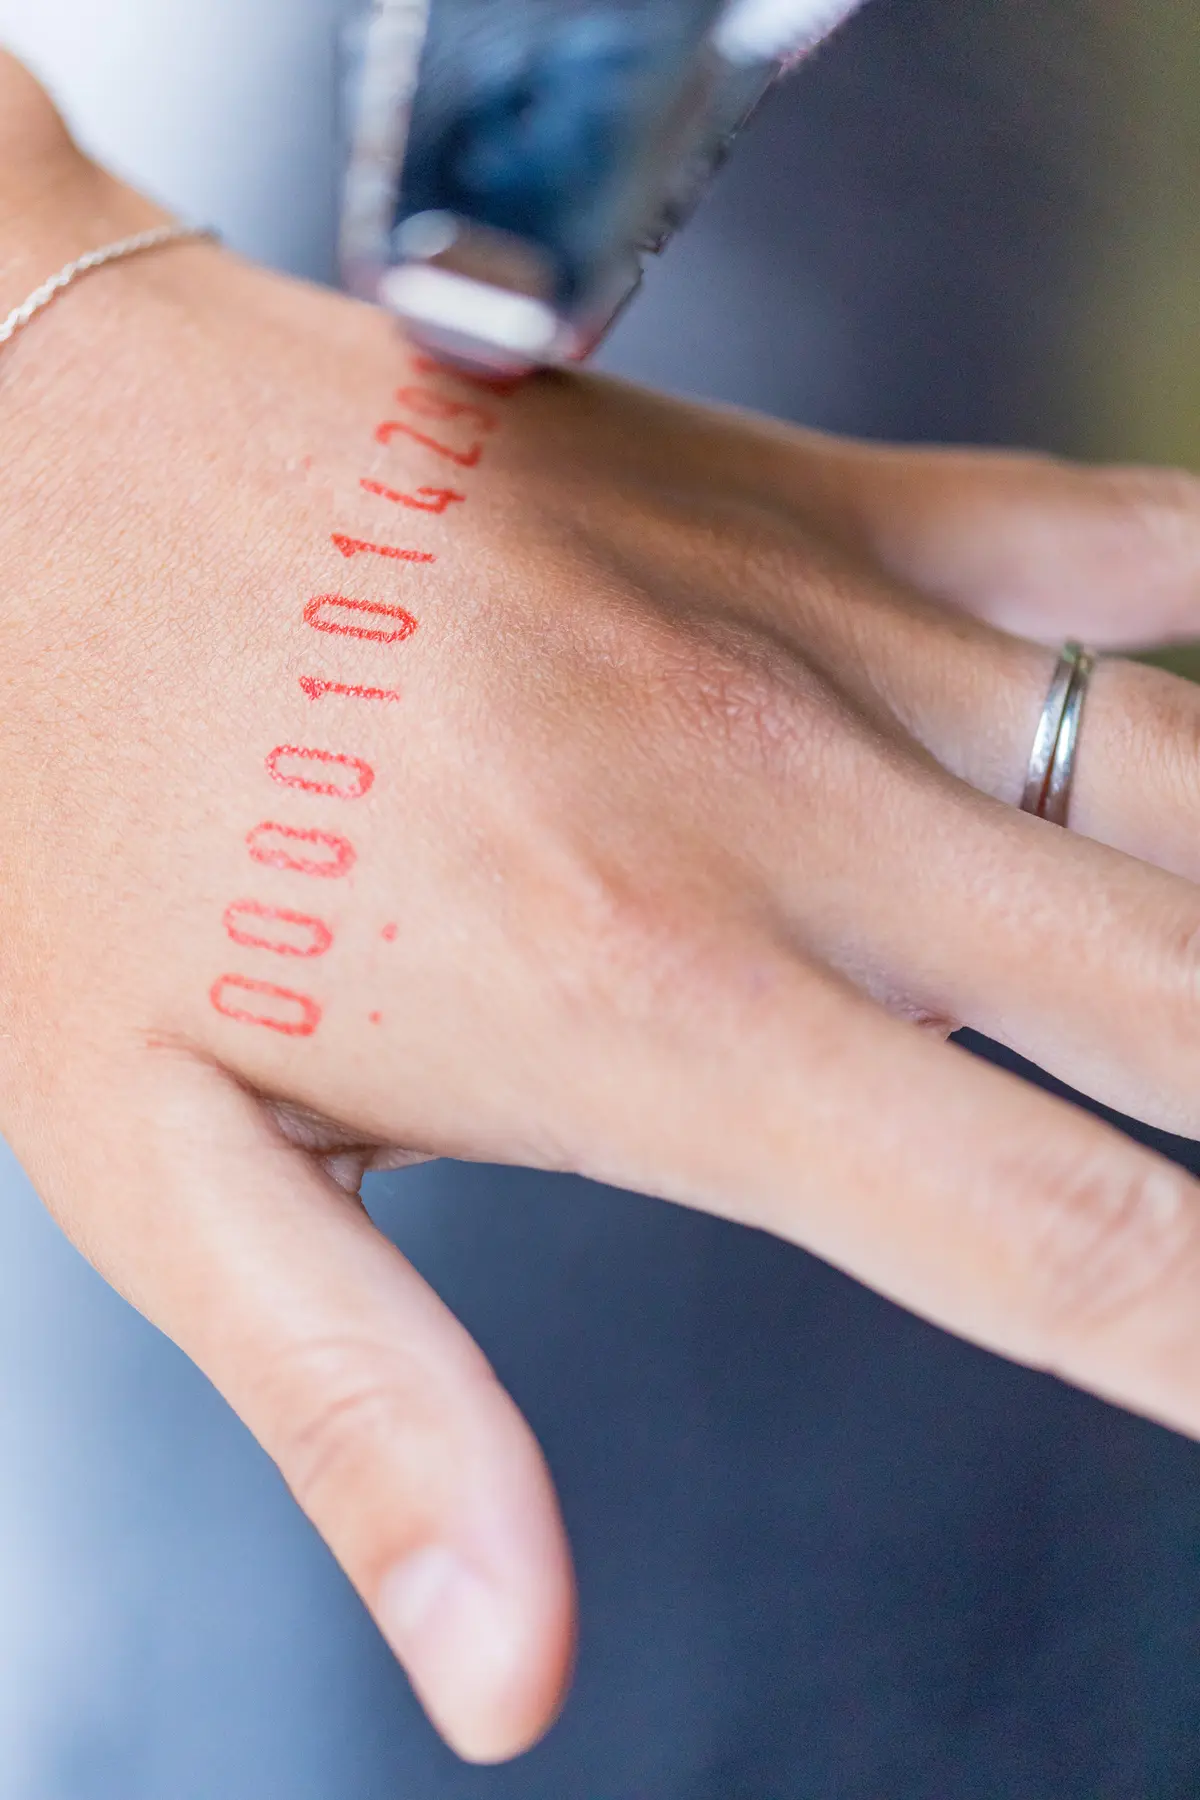 A hand adorned with a silver ring and a silver chain bracelet is being stamped with red numbers.